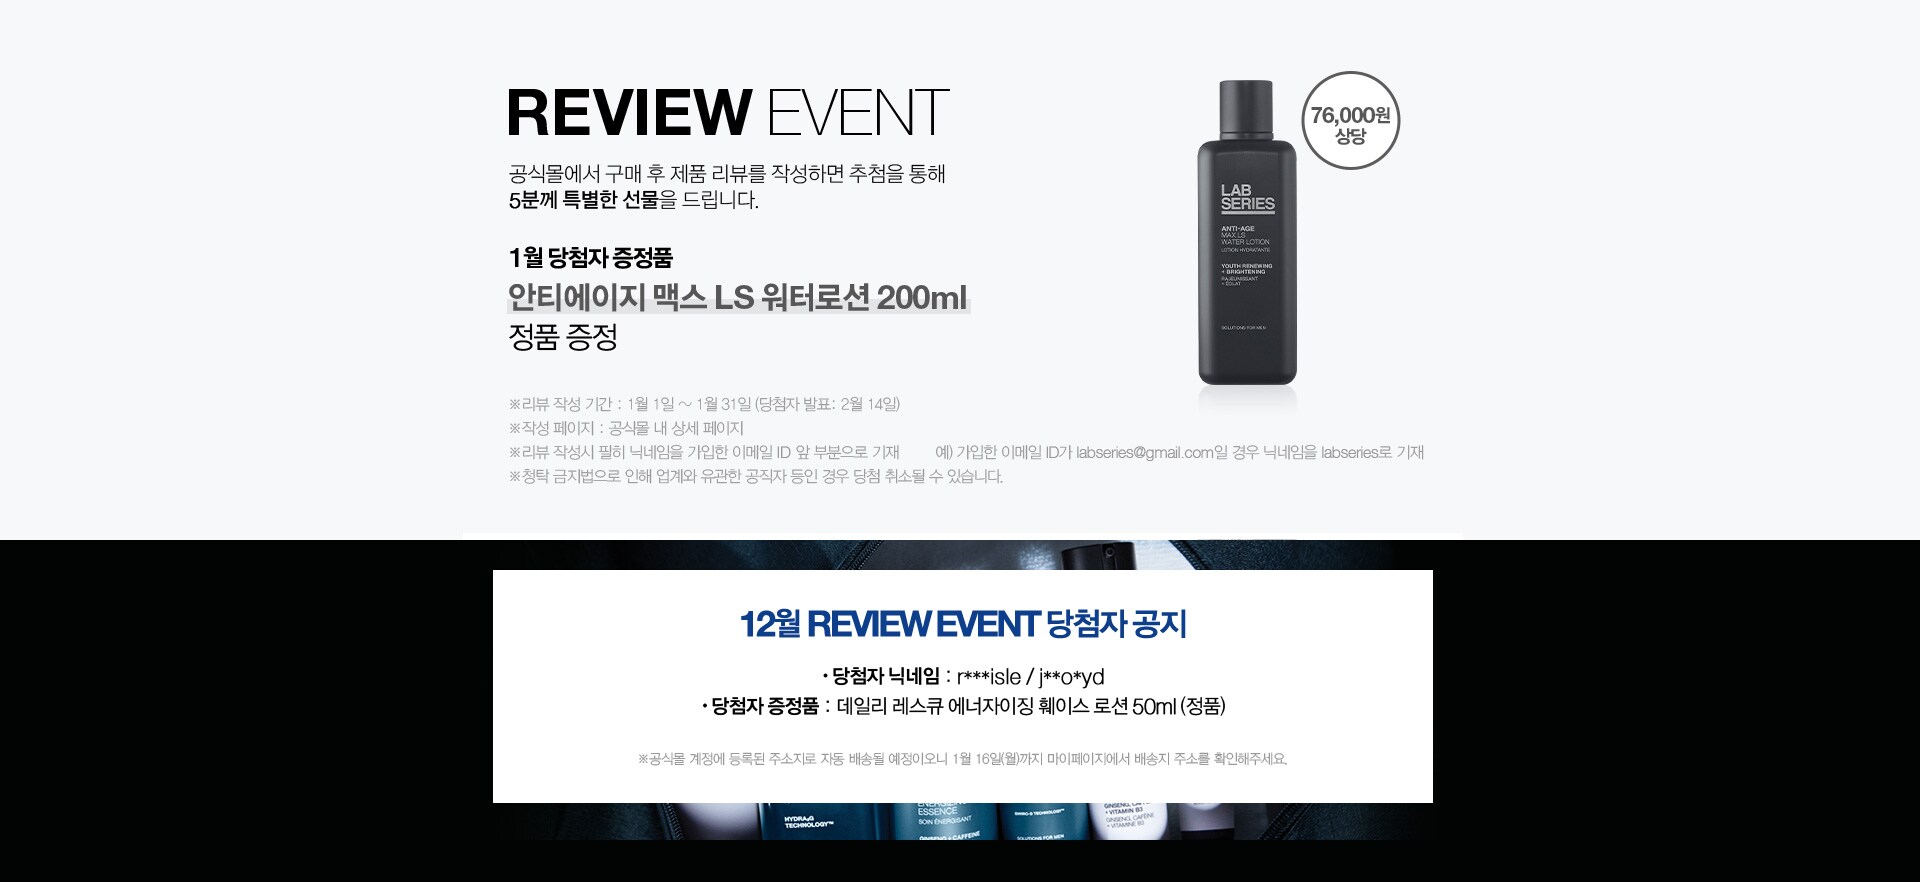 REVIEW EVENT